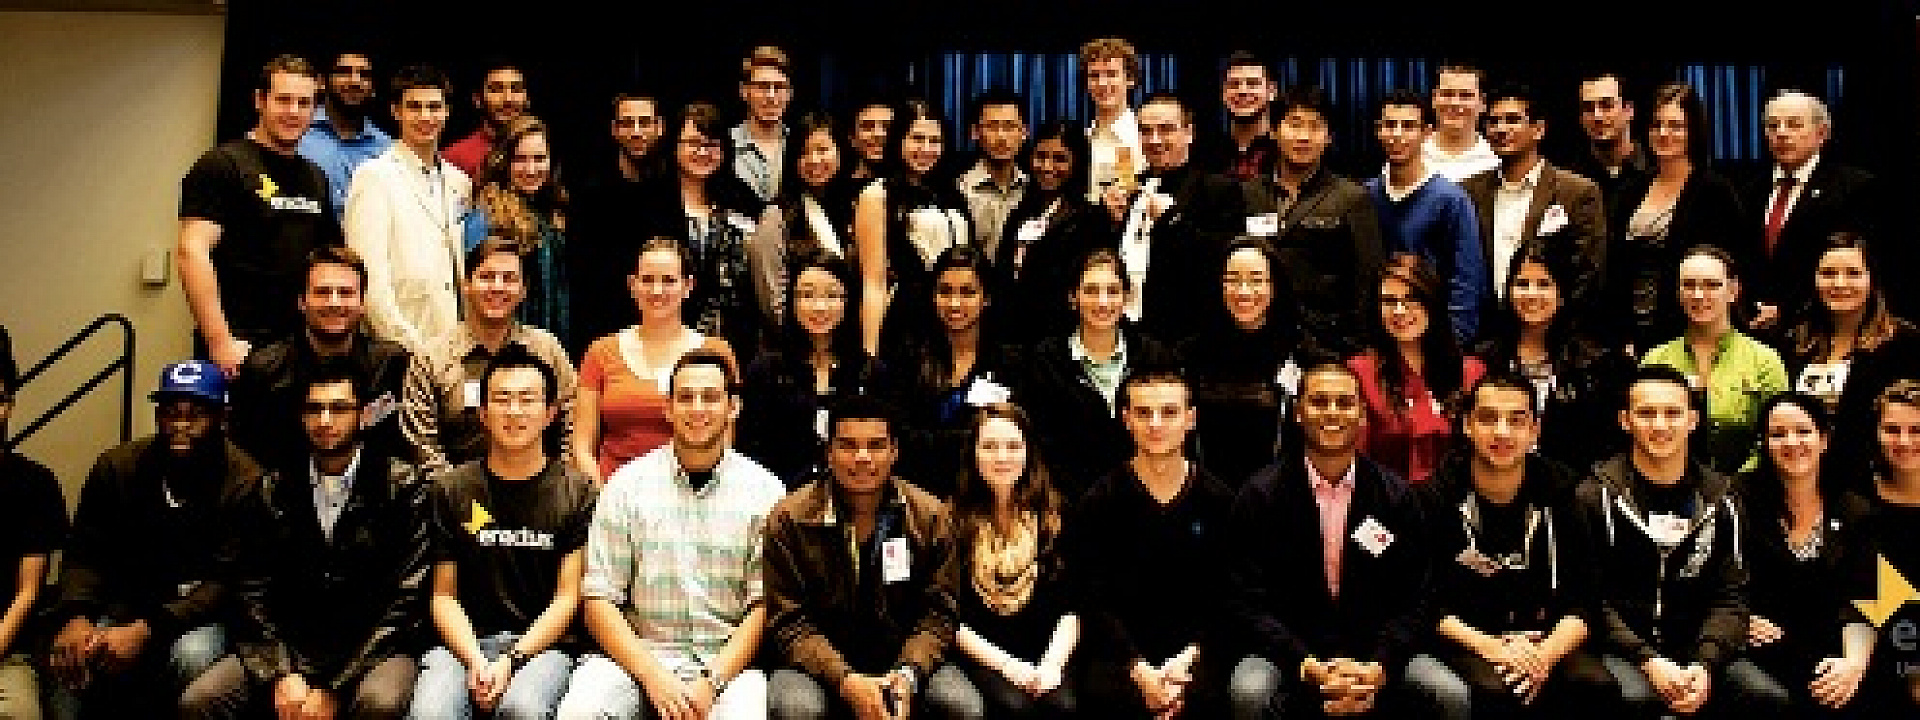 Enactus uOttawa welcomed teams from all across Eastern Ontario & Quebec to the organization’s annual leadership retreat